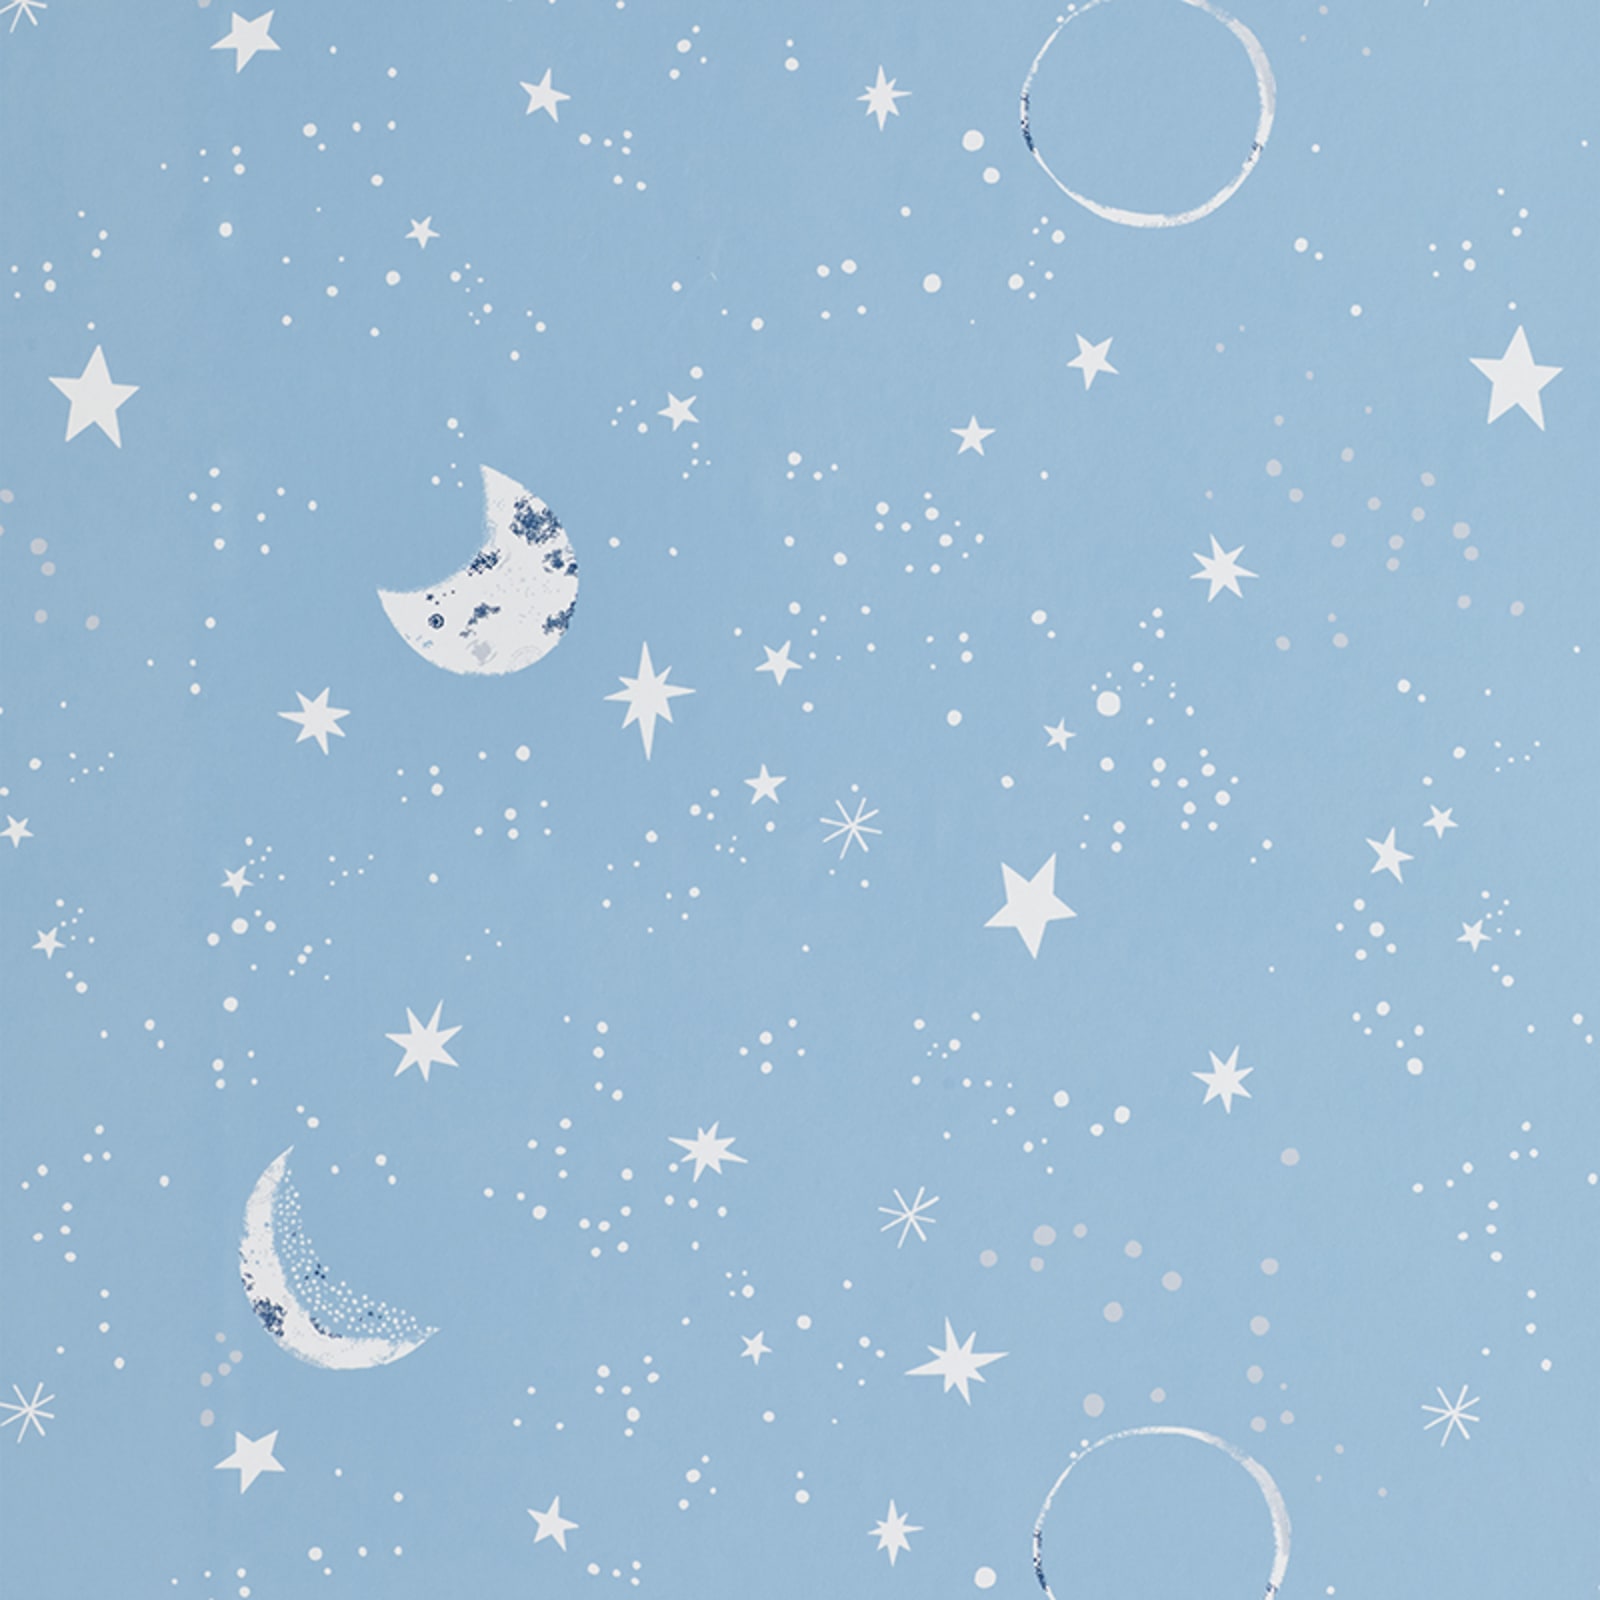 Moon Child Art Pad, 100% Post Consumer Recycled Paper, 60 Sheets